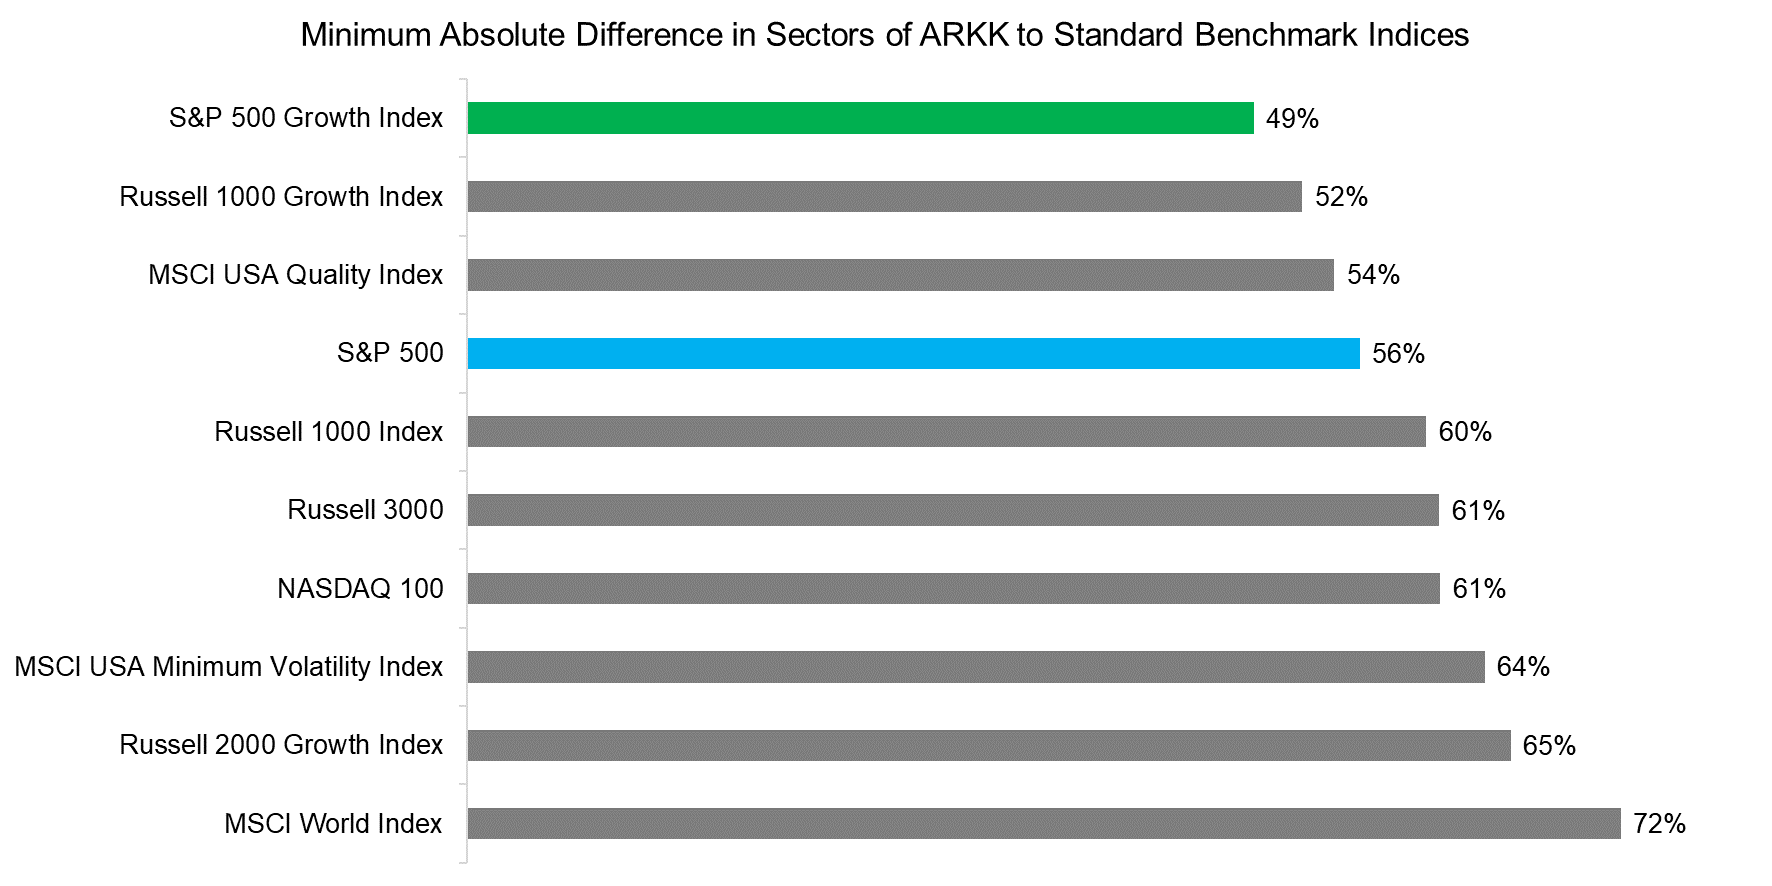 Minimum Absolute Difference in Sectors of ARKK to Standard Benchmark Indices